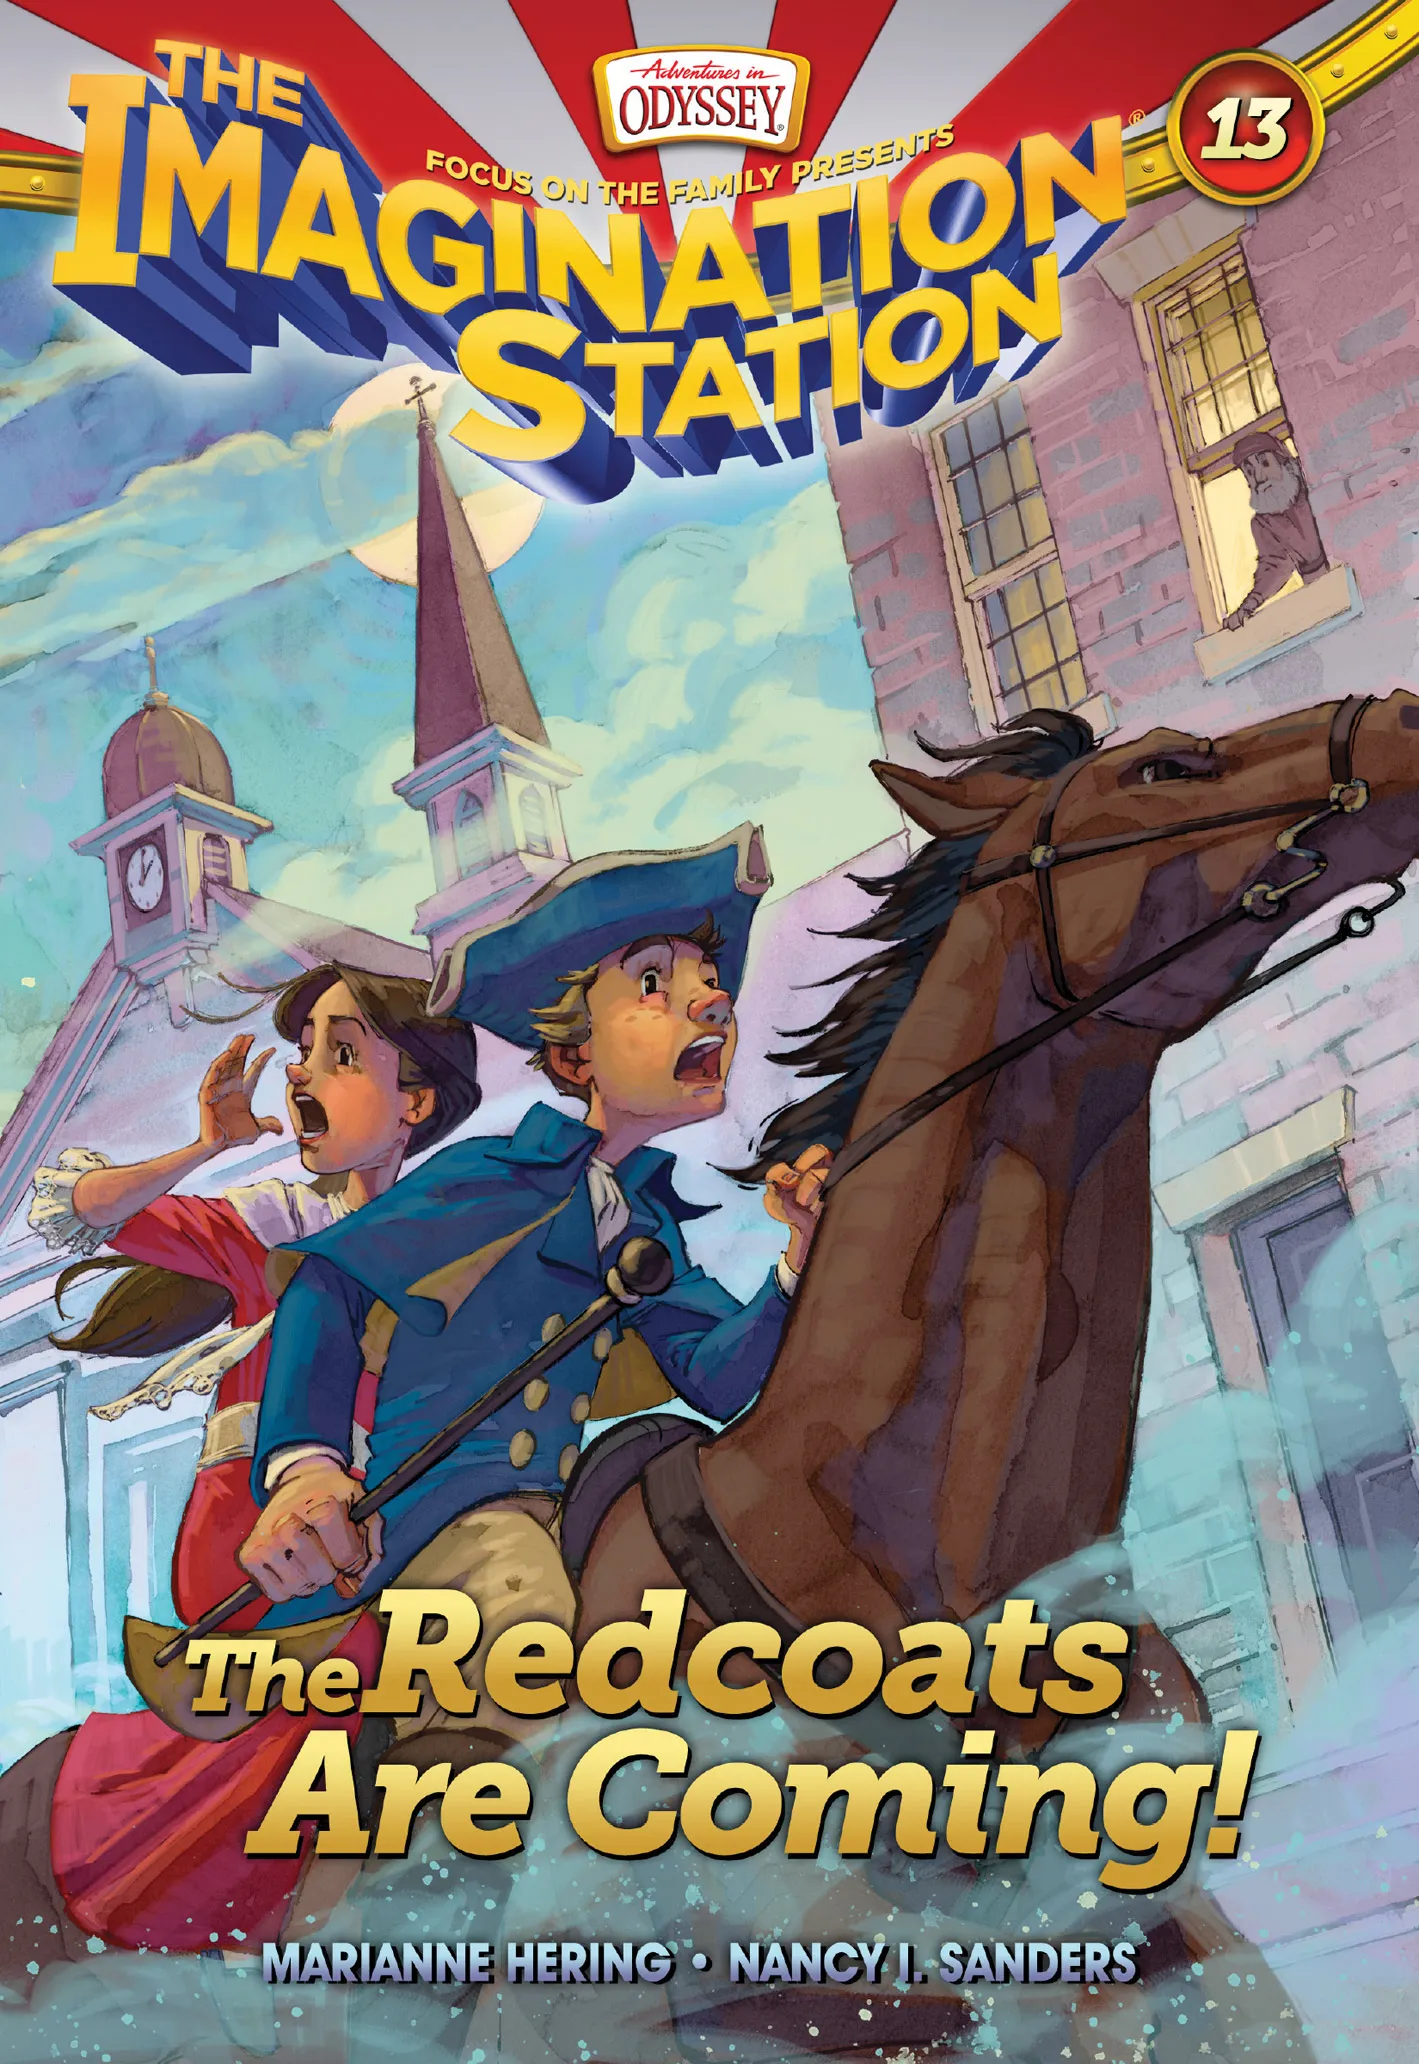 The Redcoats Are Coming! (AIO Imagination Station #13)